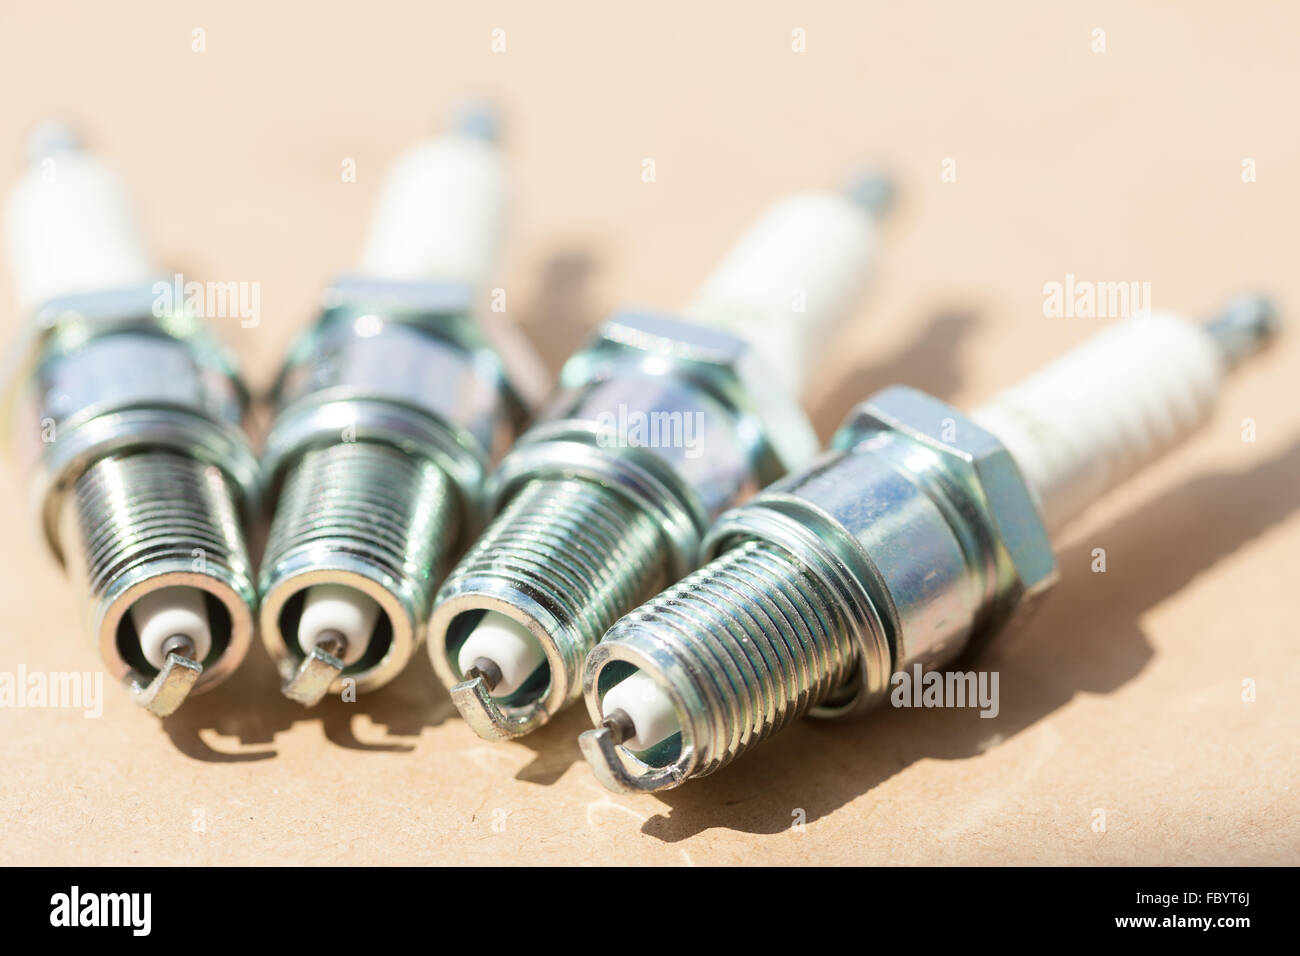 Auto service. Set of spark plugs as spare part of car. Stock Photo